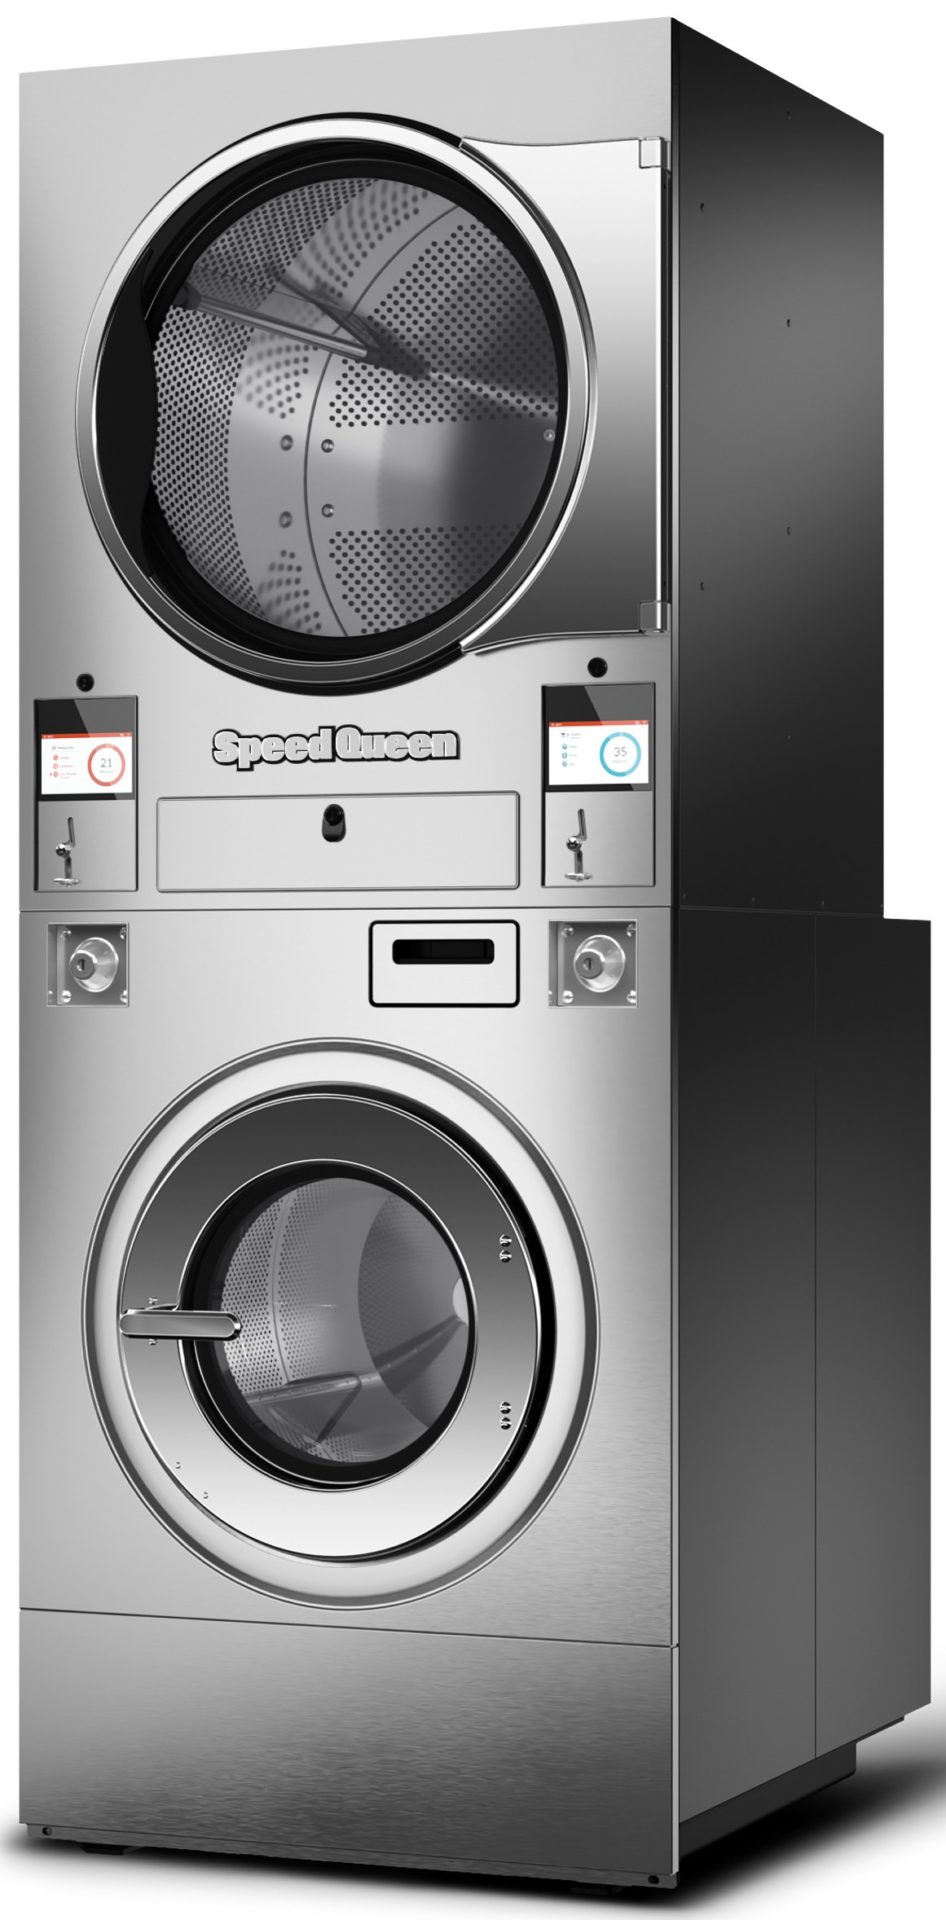 Stackable 14kg Washer And 14kg Dryer Speed Queen Equipment